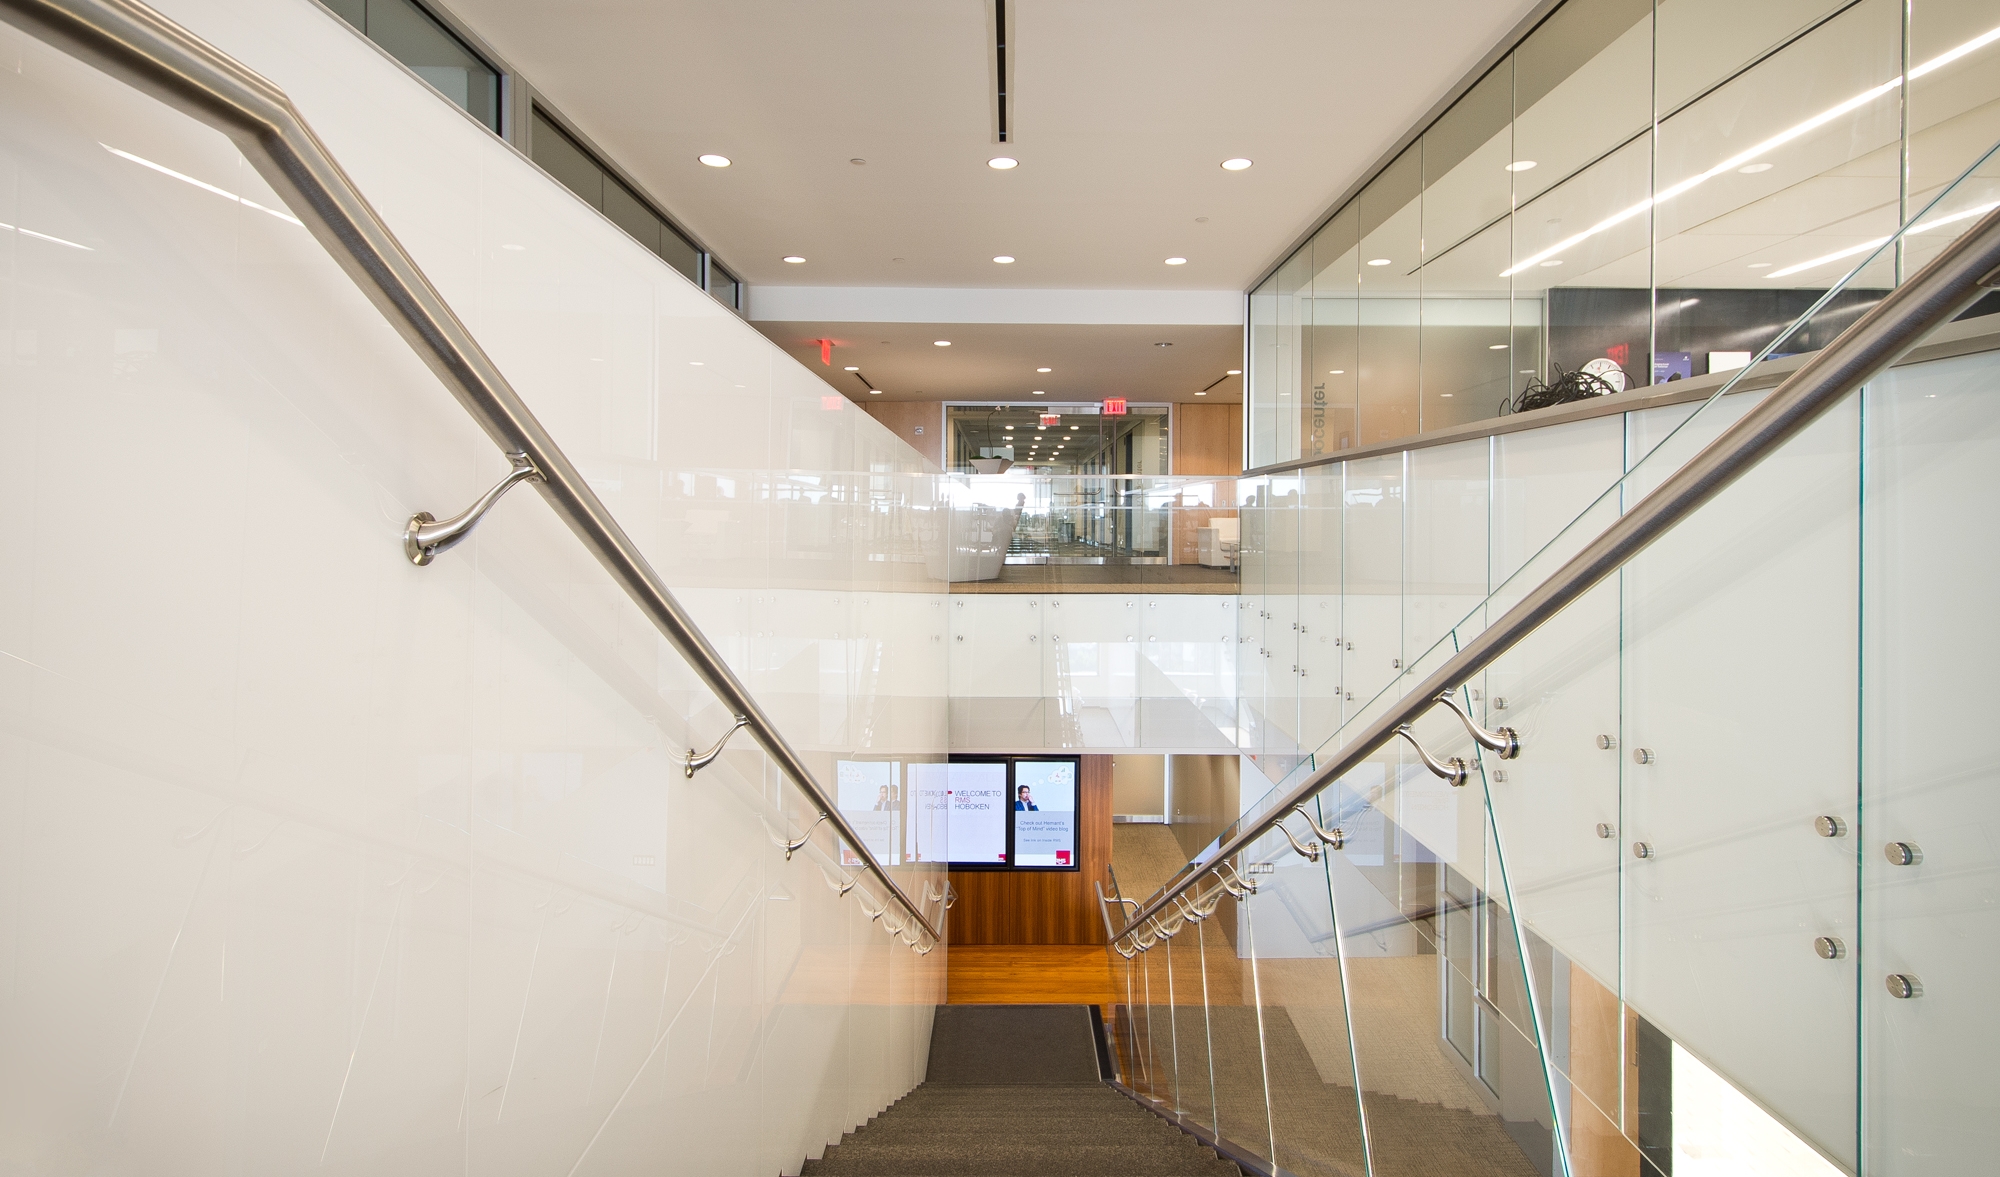 res4-resolution-4-architecture-modern-commercial-rms-riskmanagementsolutions-hoboken-newjersey-interior-office-stairs.jpg